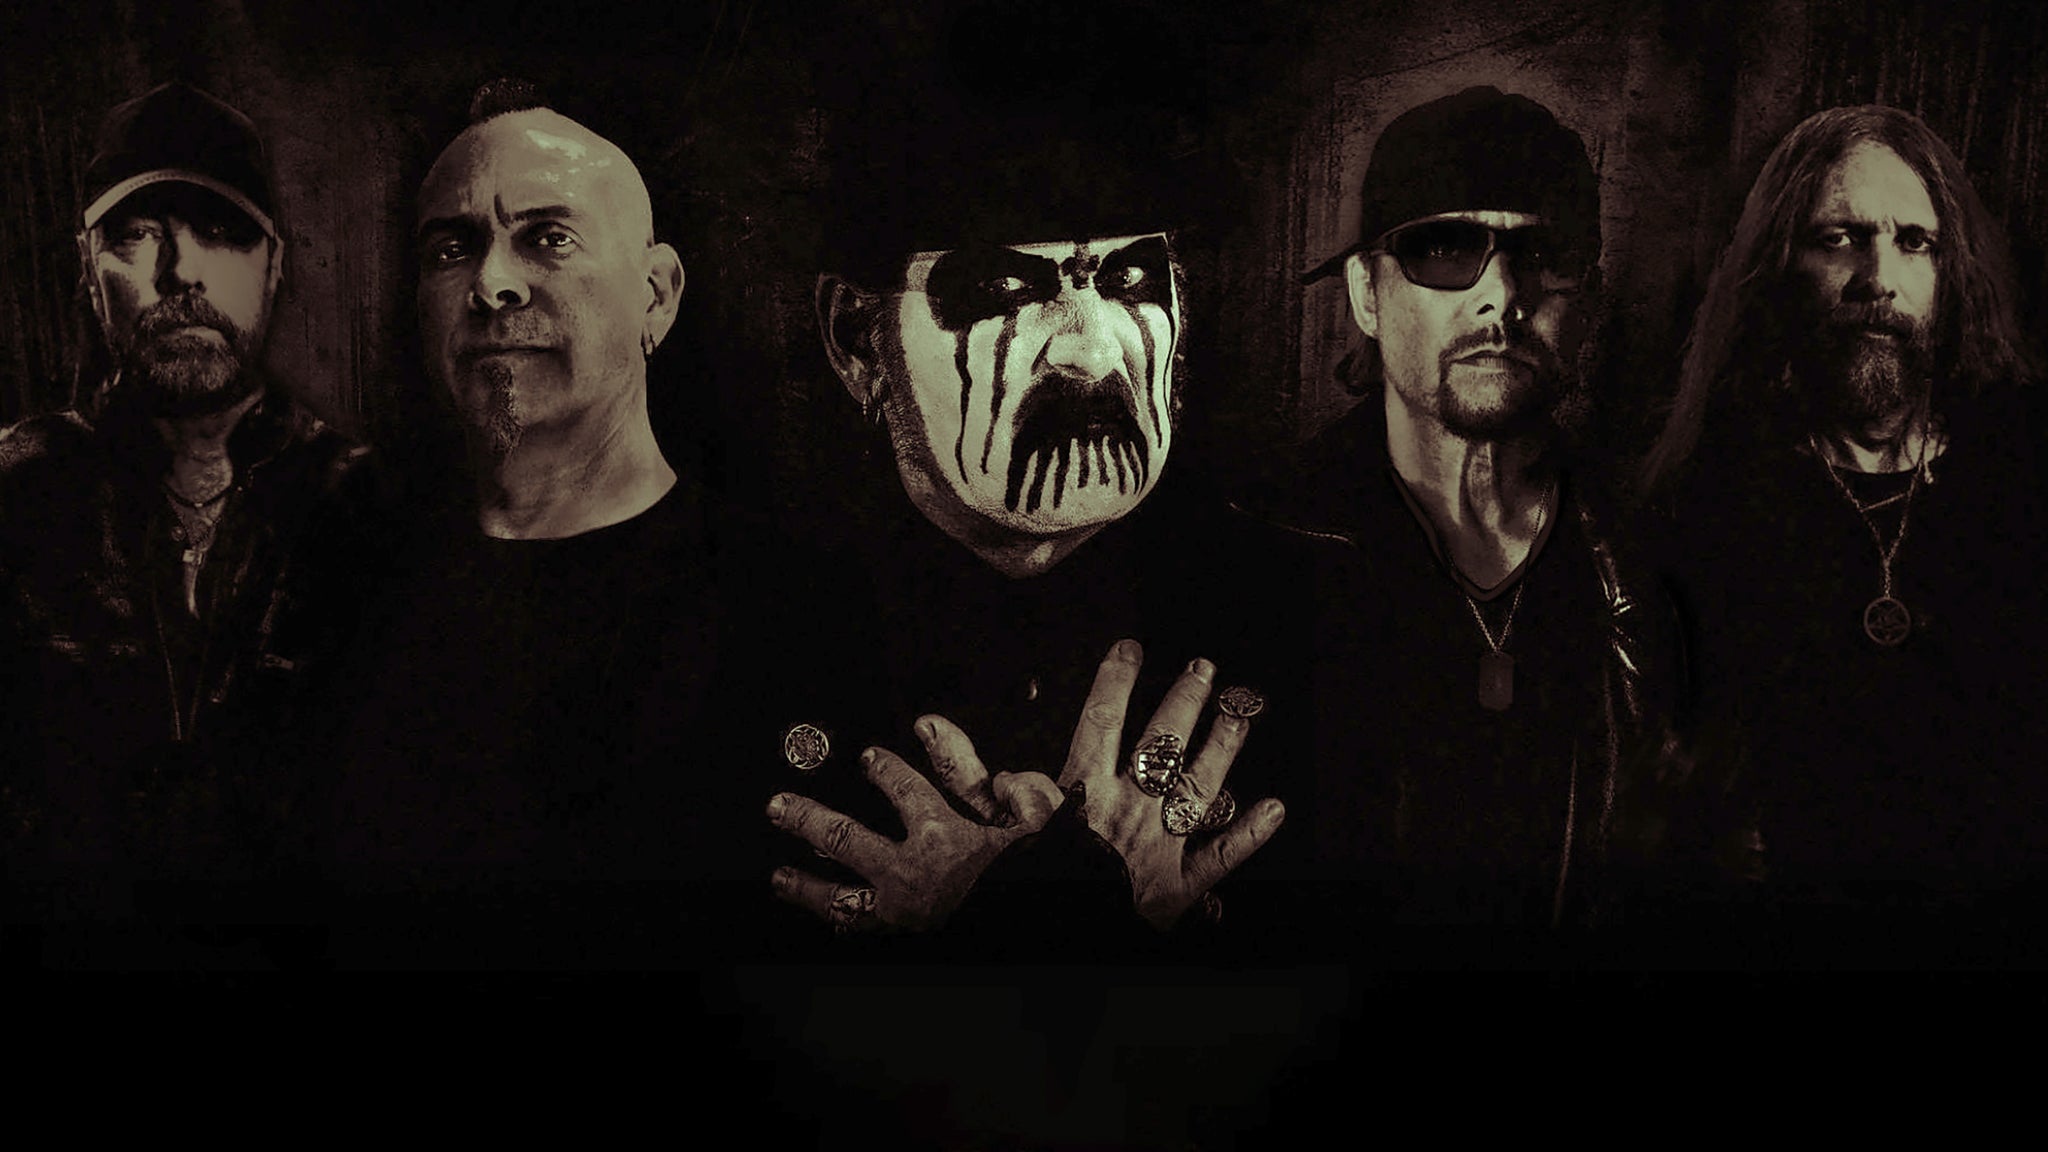 MERCYFUL FATE returns with special guests Kreator and Midnight presale passcode